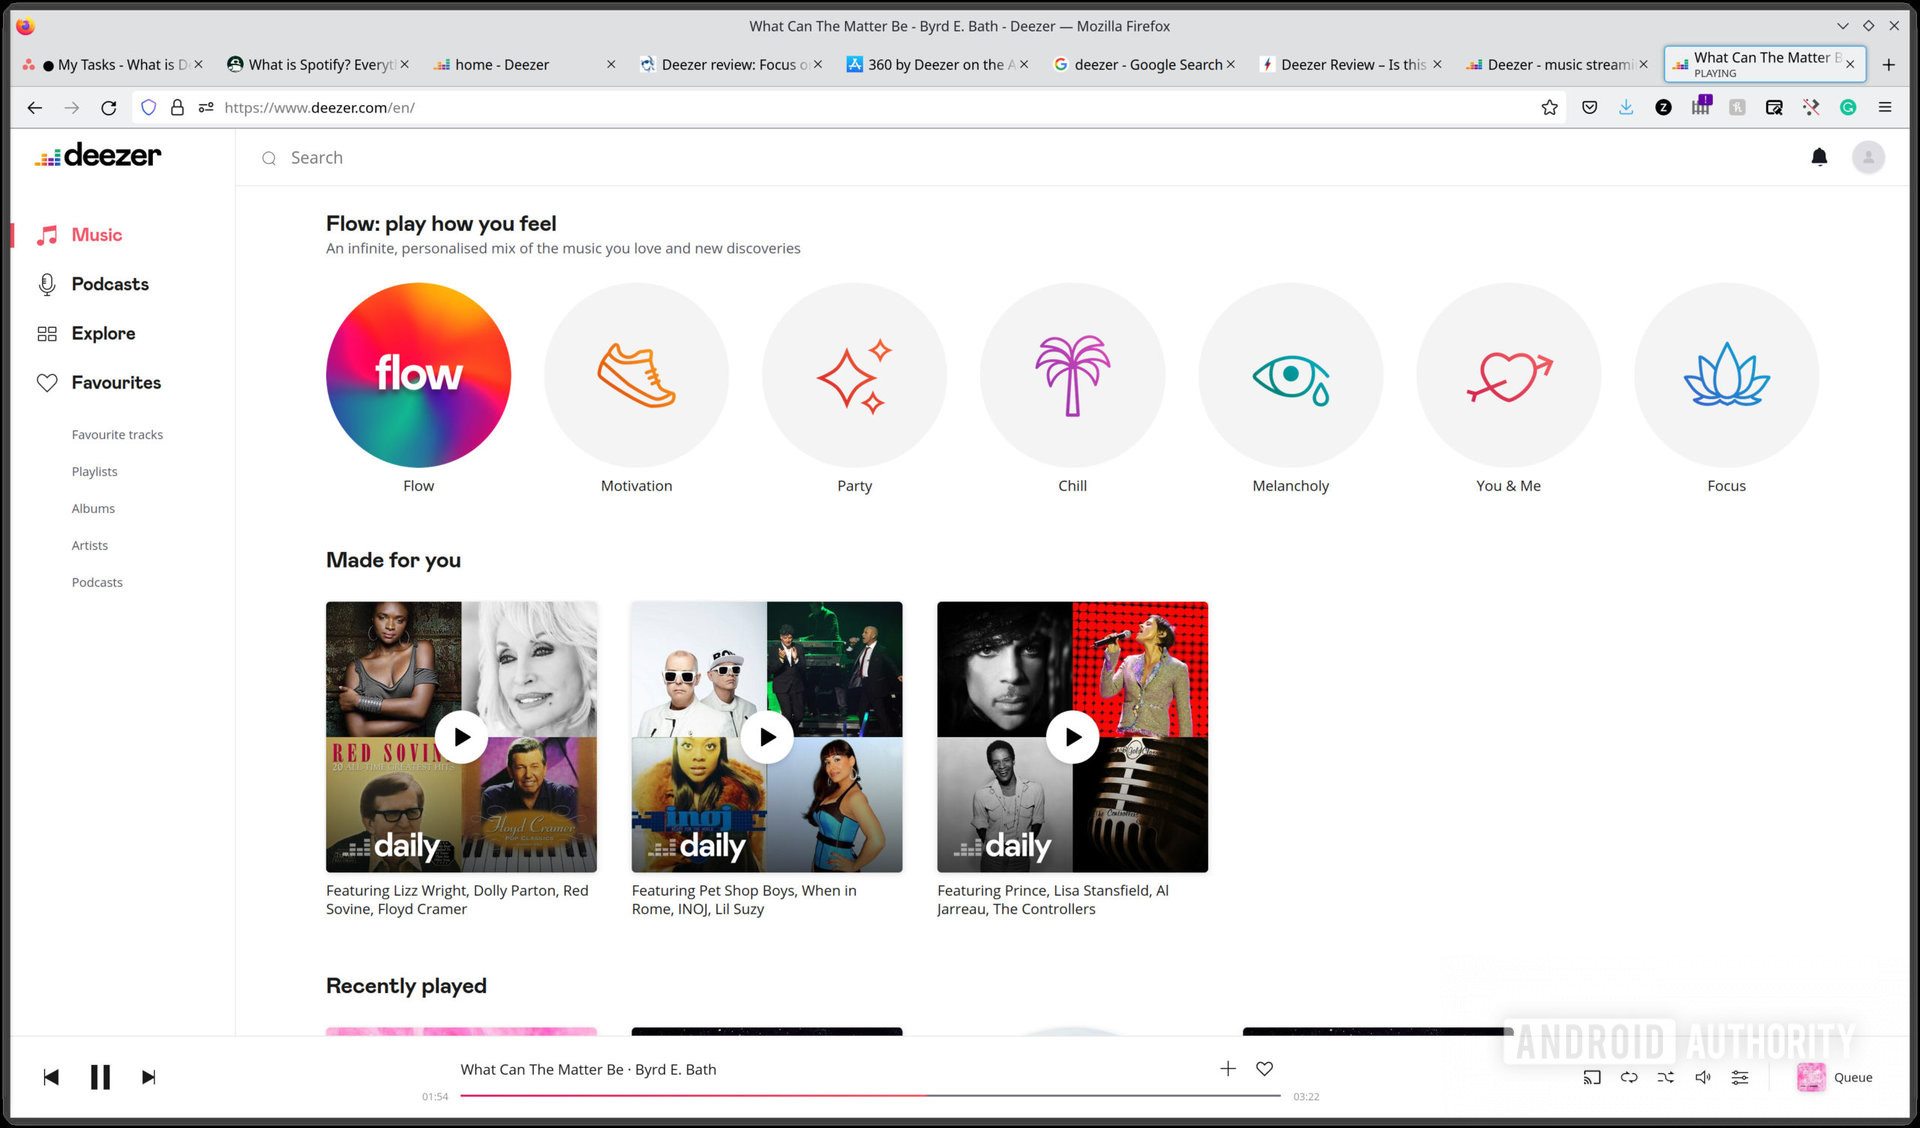 The Deezer home page with &quot;Flow&quot; clearly visible and variois genres and albums available.